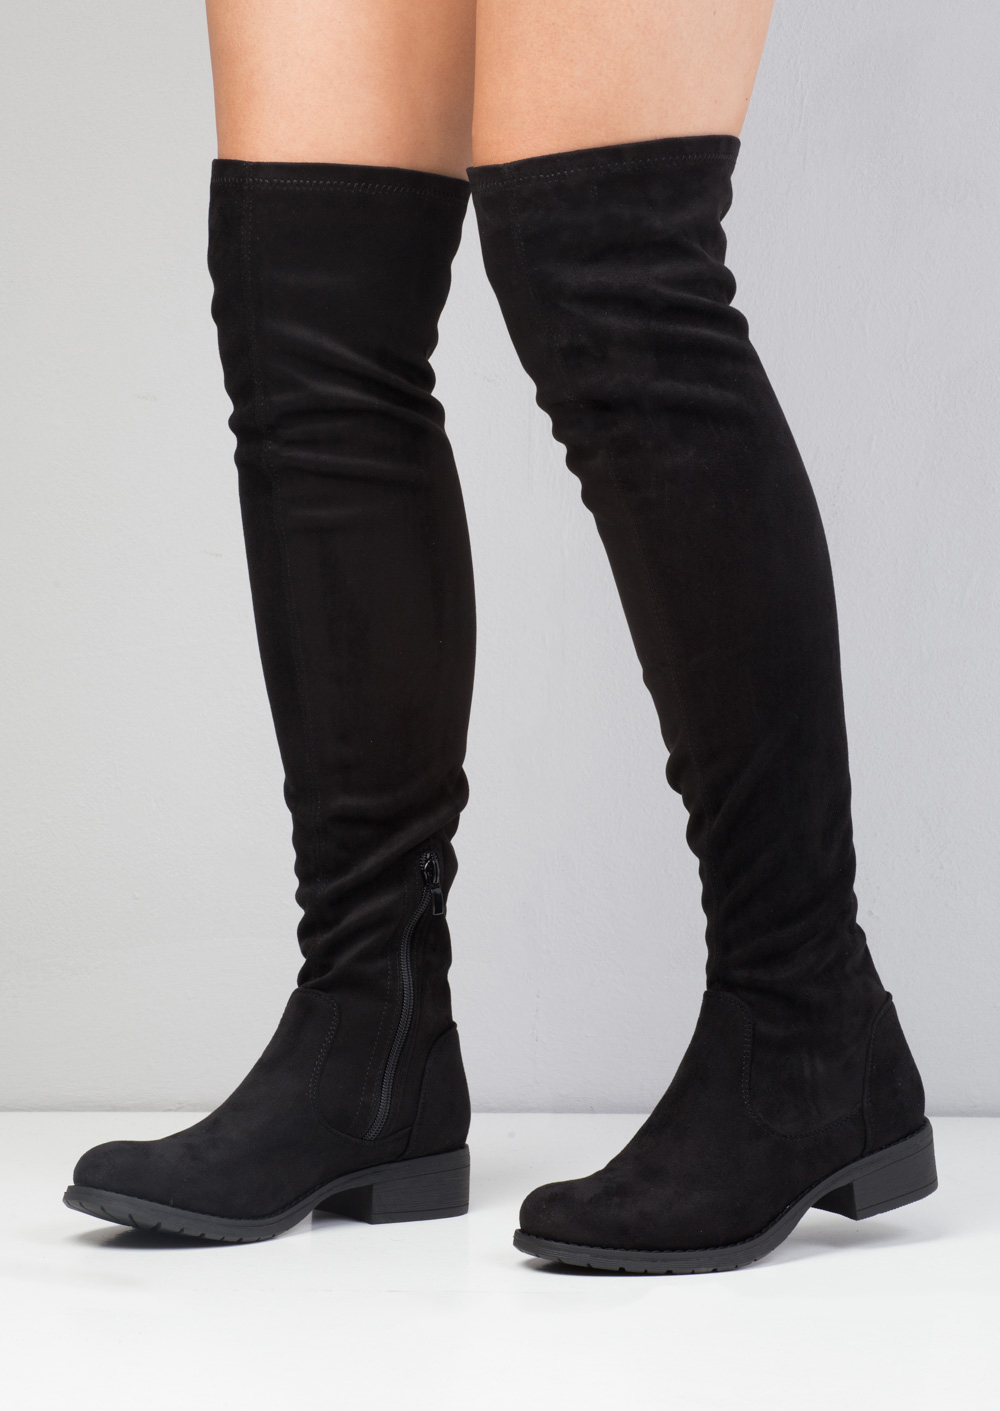 Over the Knee High Faux Flat Suede Boots Black